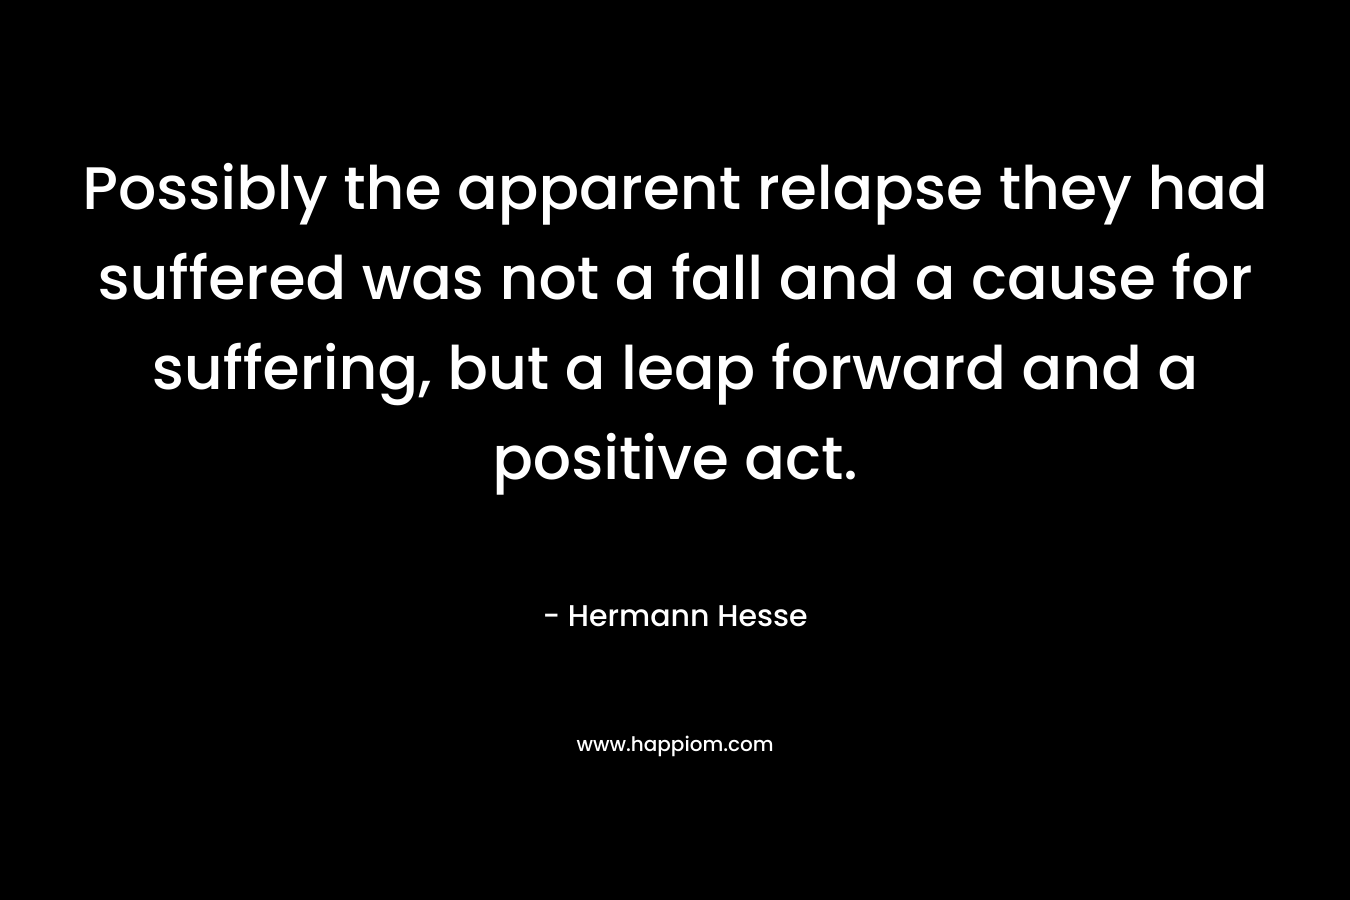 Possibly the apparent relapse they had suffered was not a fall and a cause for suffering, but a leap forward and a positive act. – Hermann Hesse